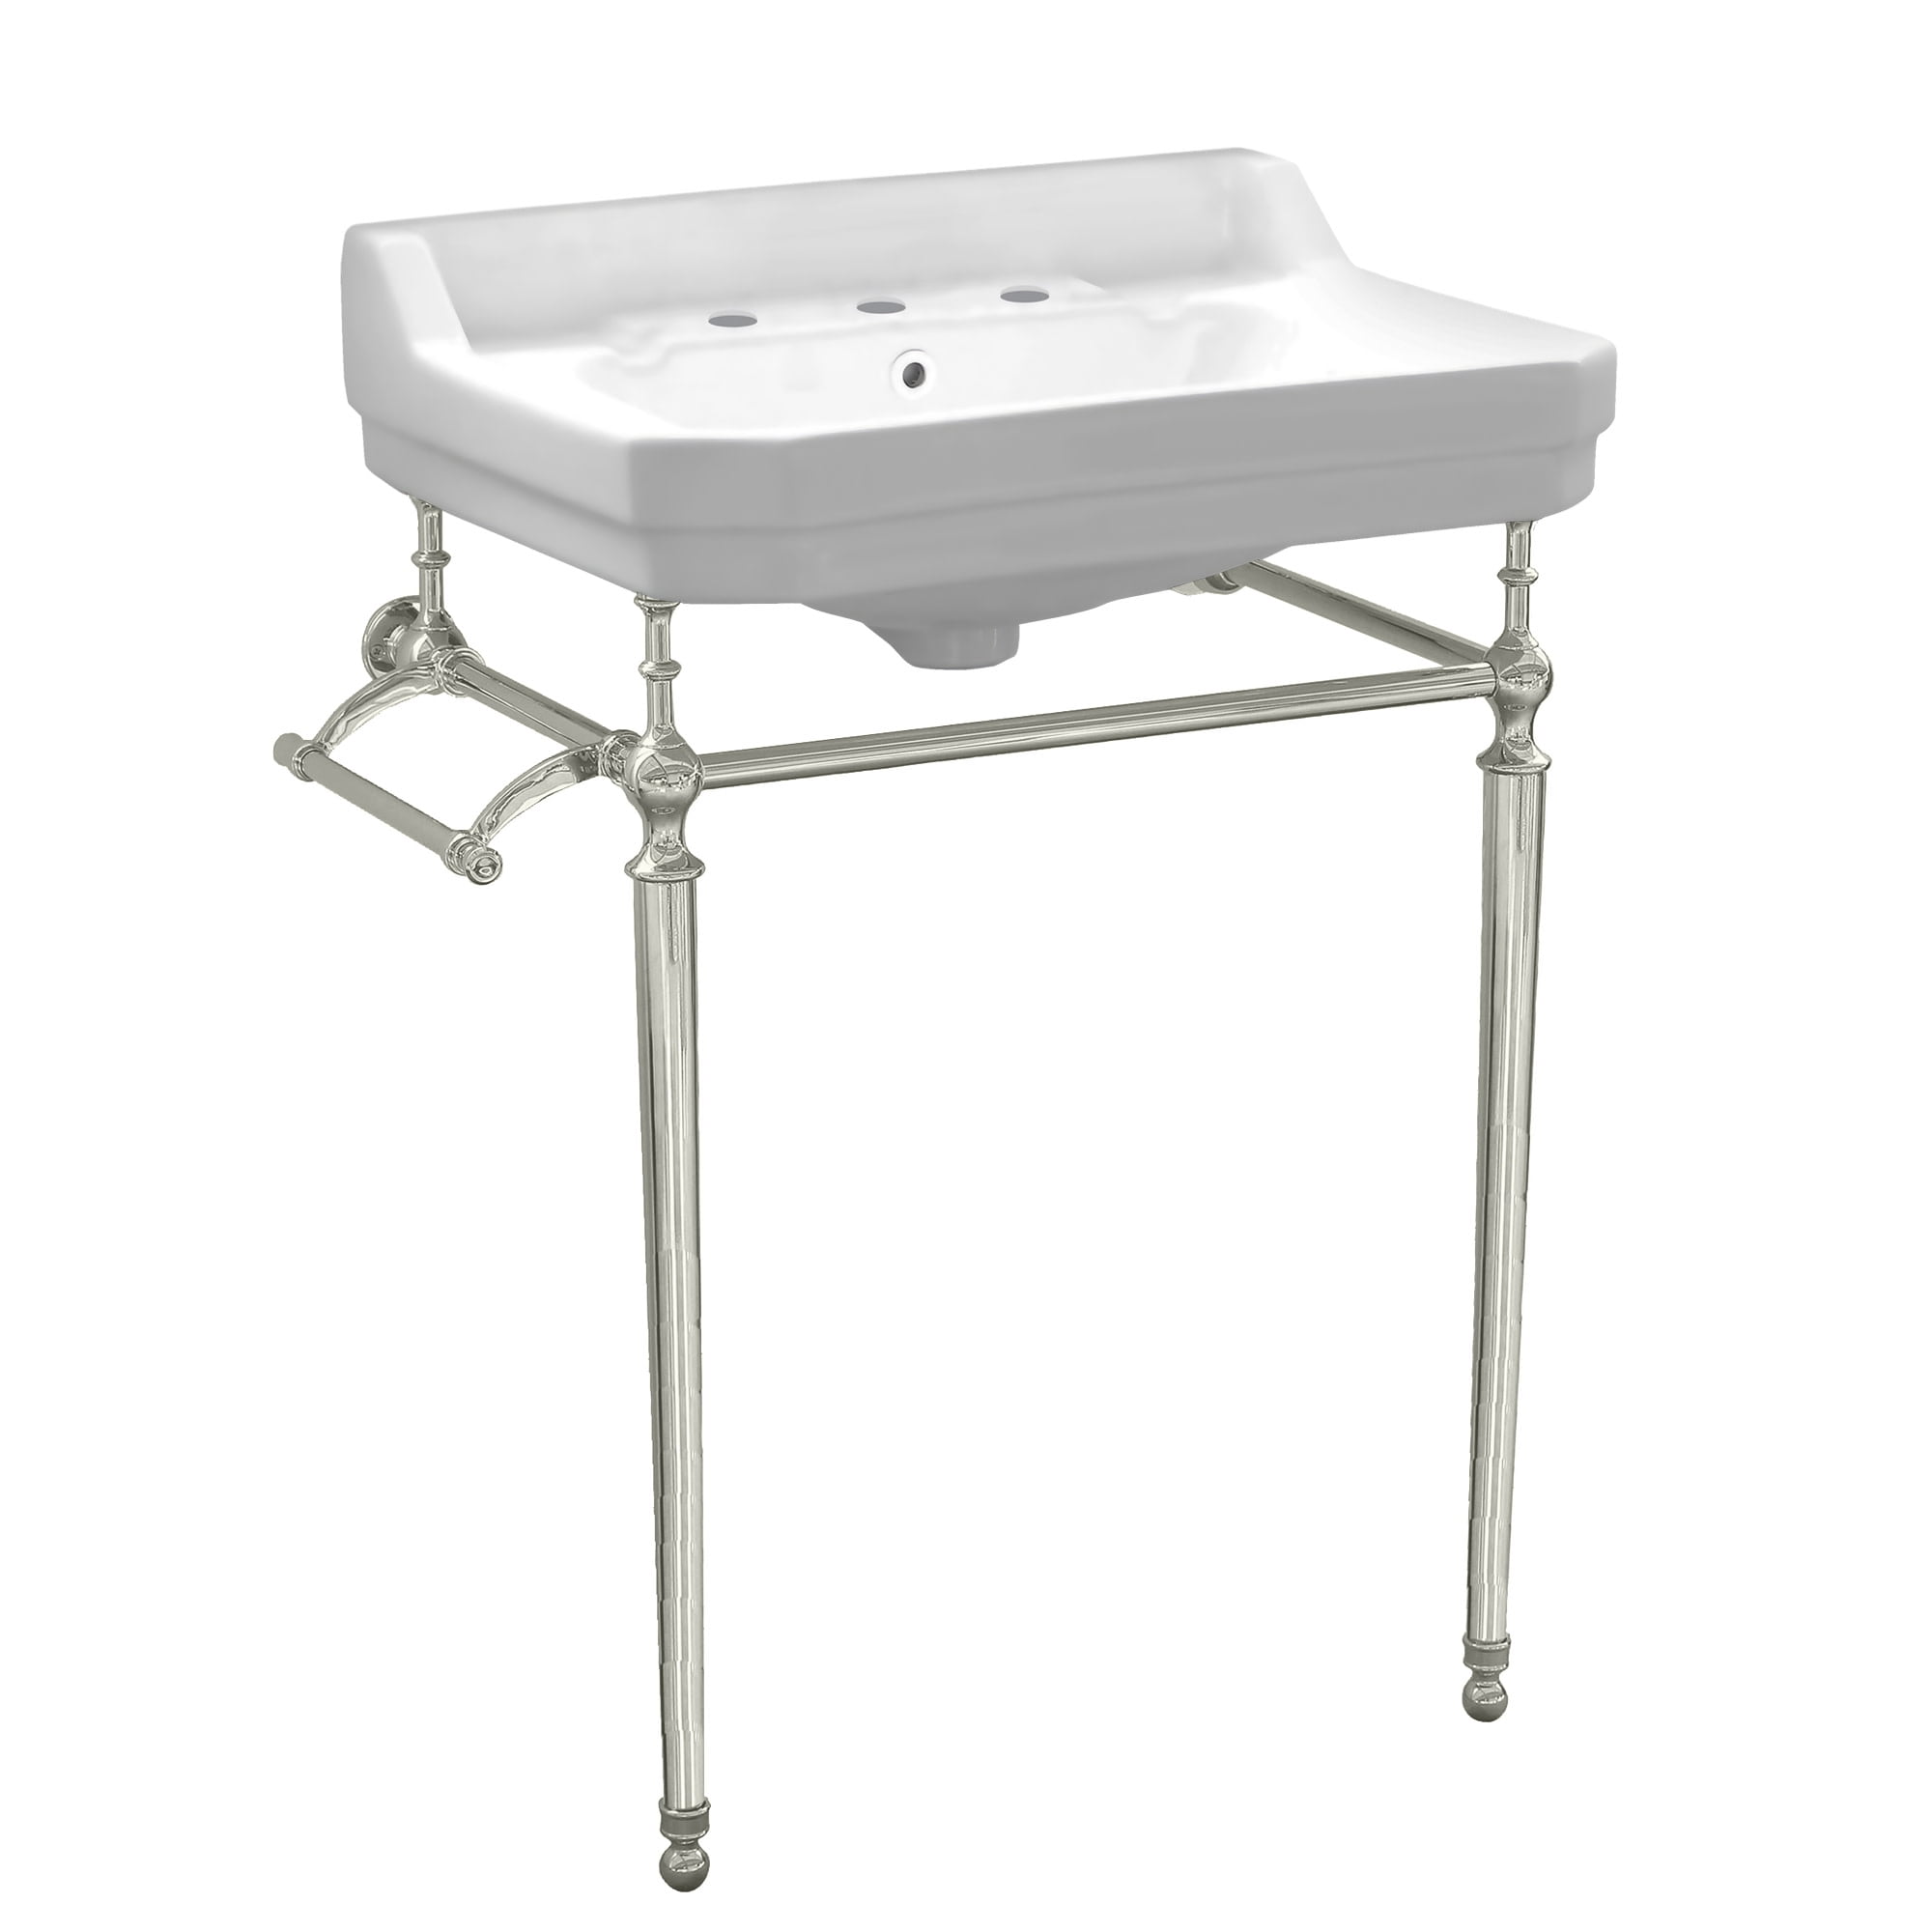 Whv024-l33-3h-pn Victoriahaus Console With Integrated Rectangular Bowl & 3 Faucet Holes - Polished Nickel